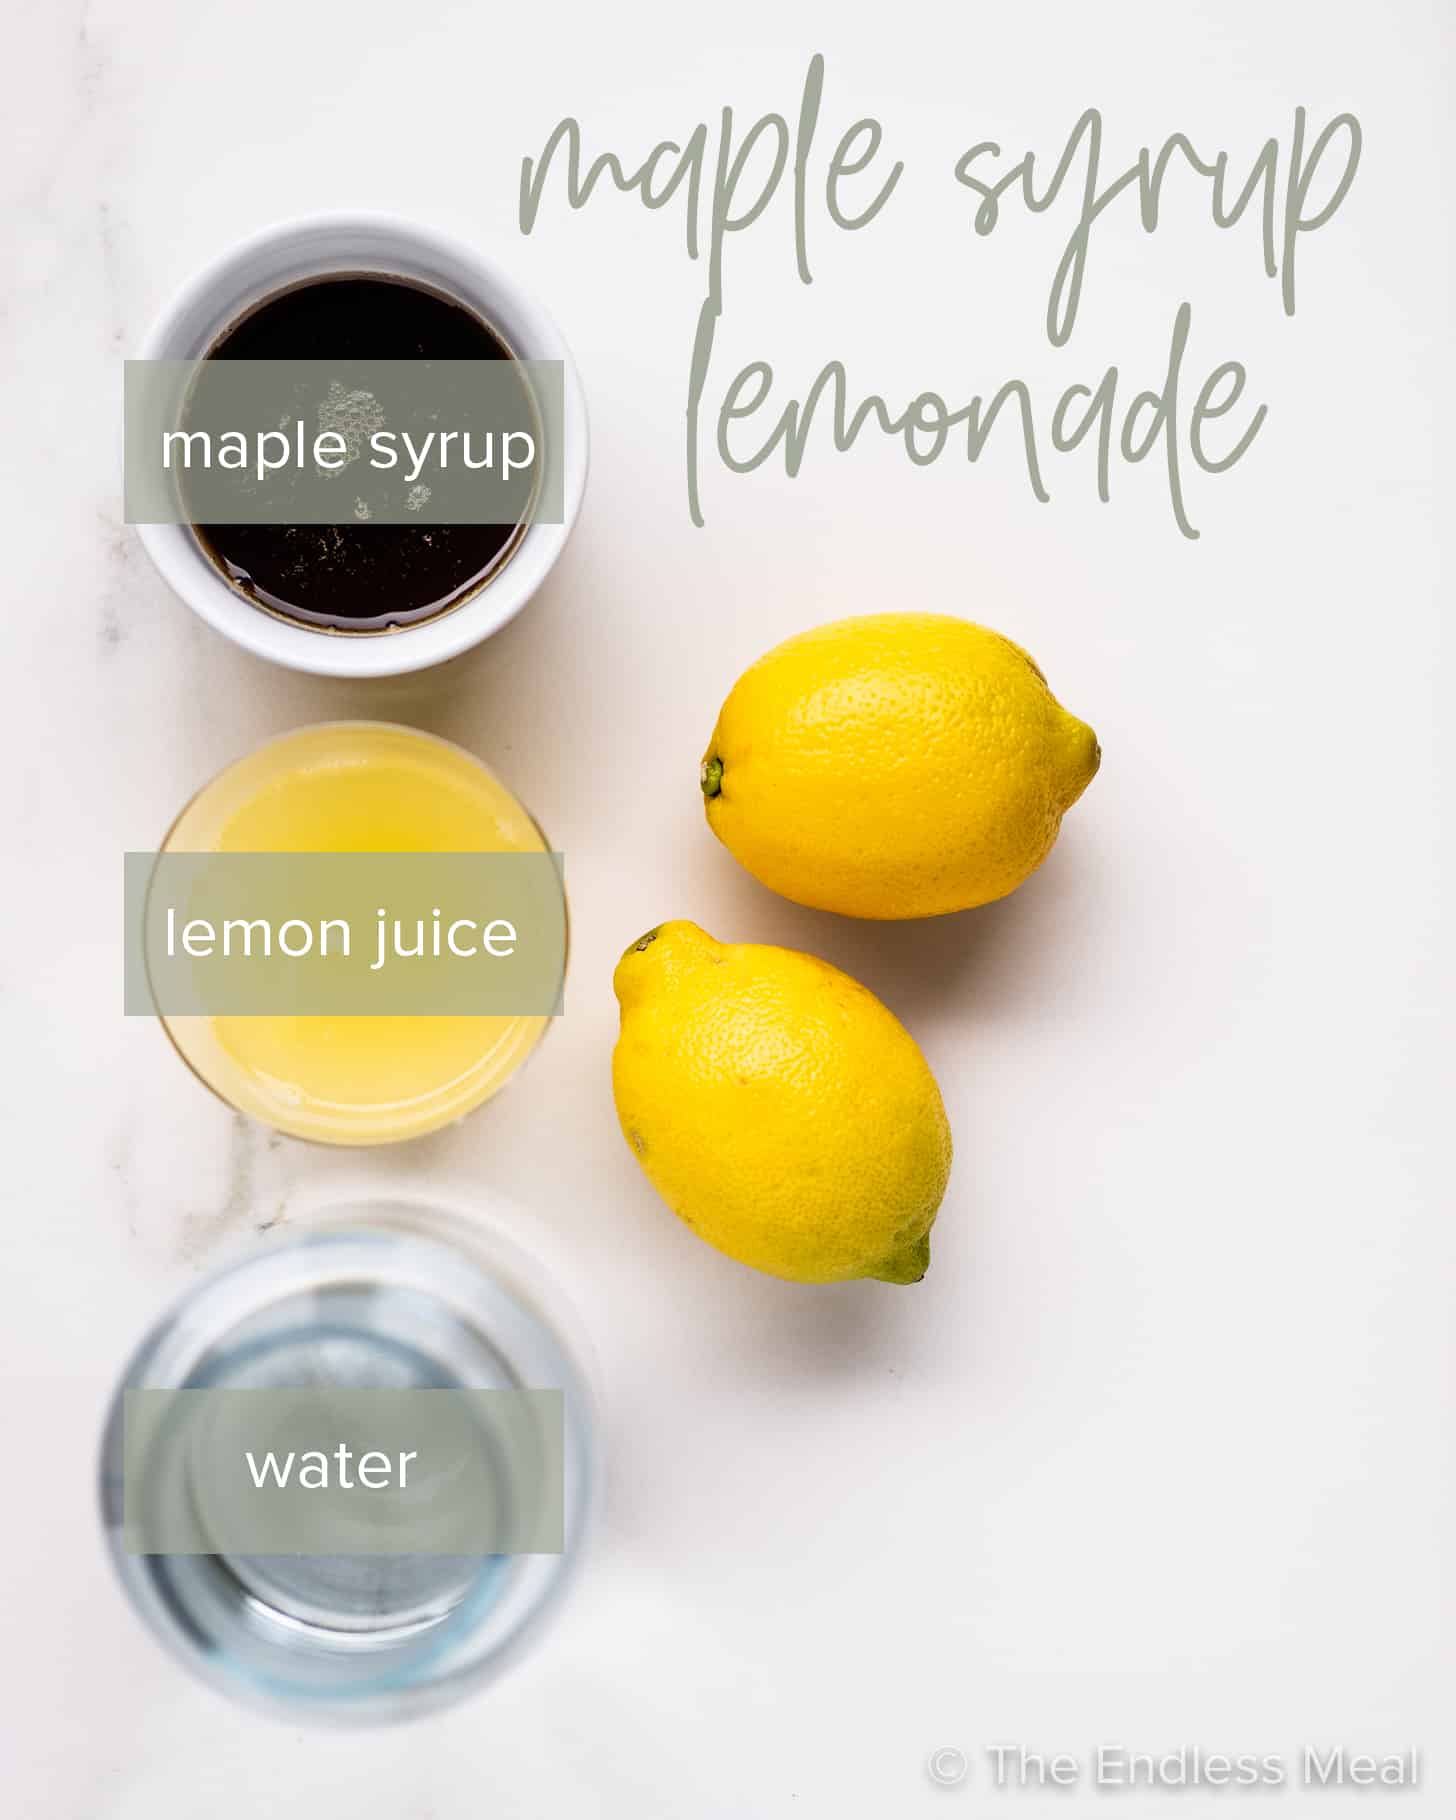 the ingredients to make a maple lemonade